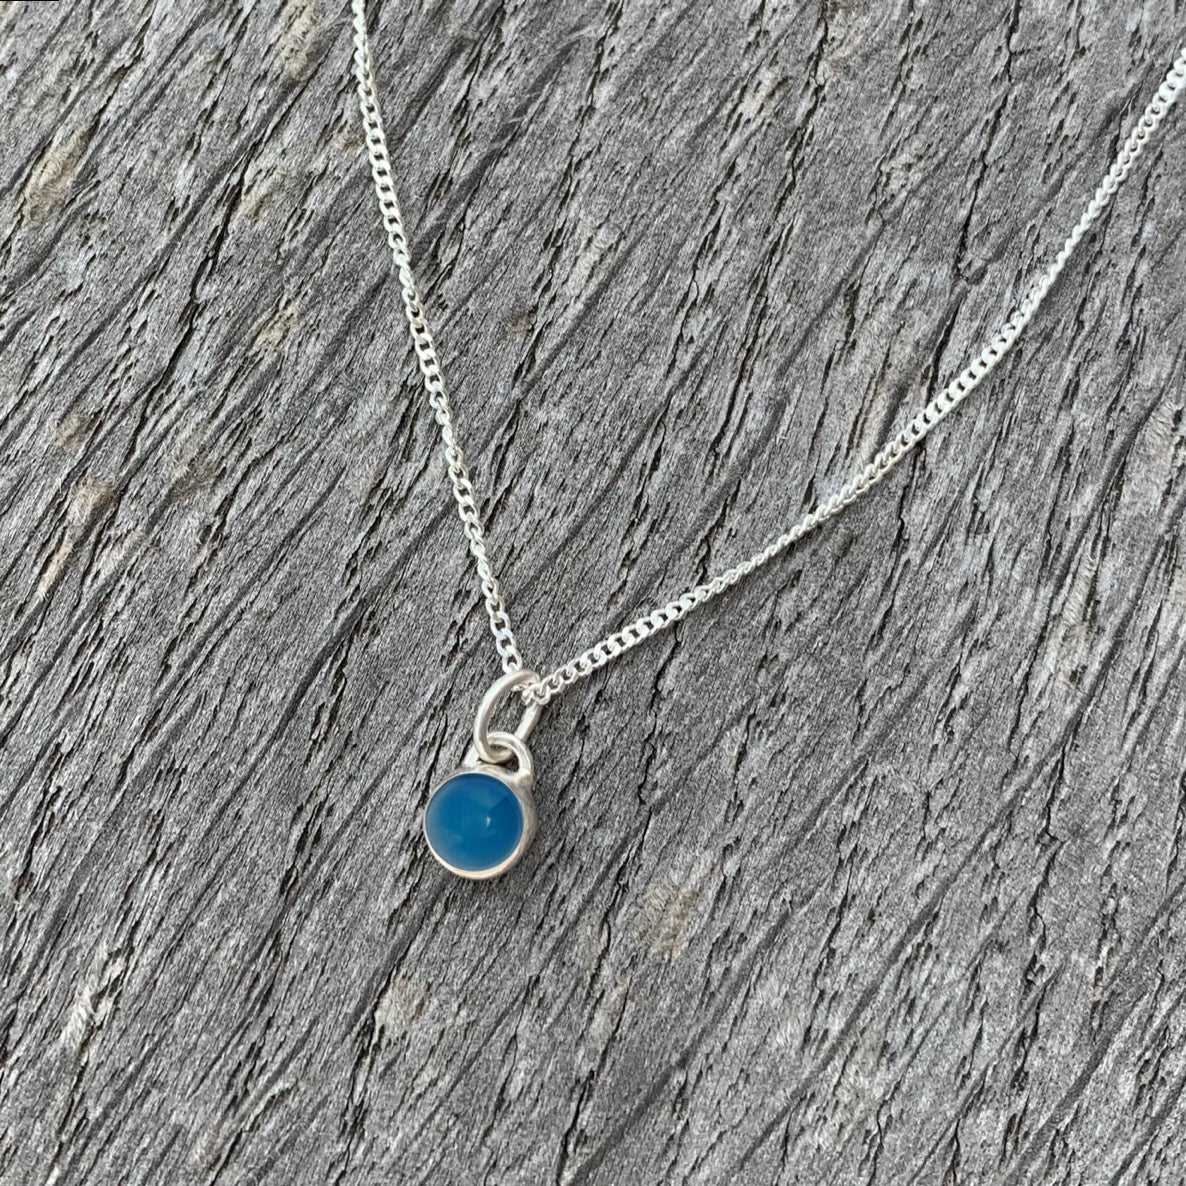 A blue agate stone set in silver on a sterling silver chain.